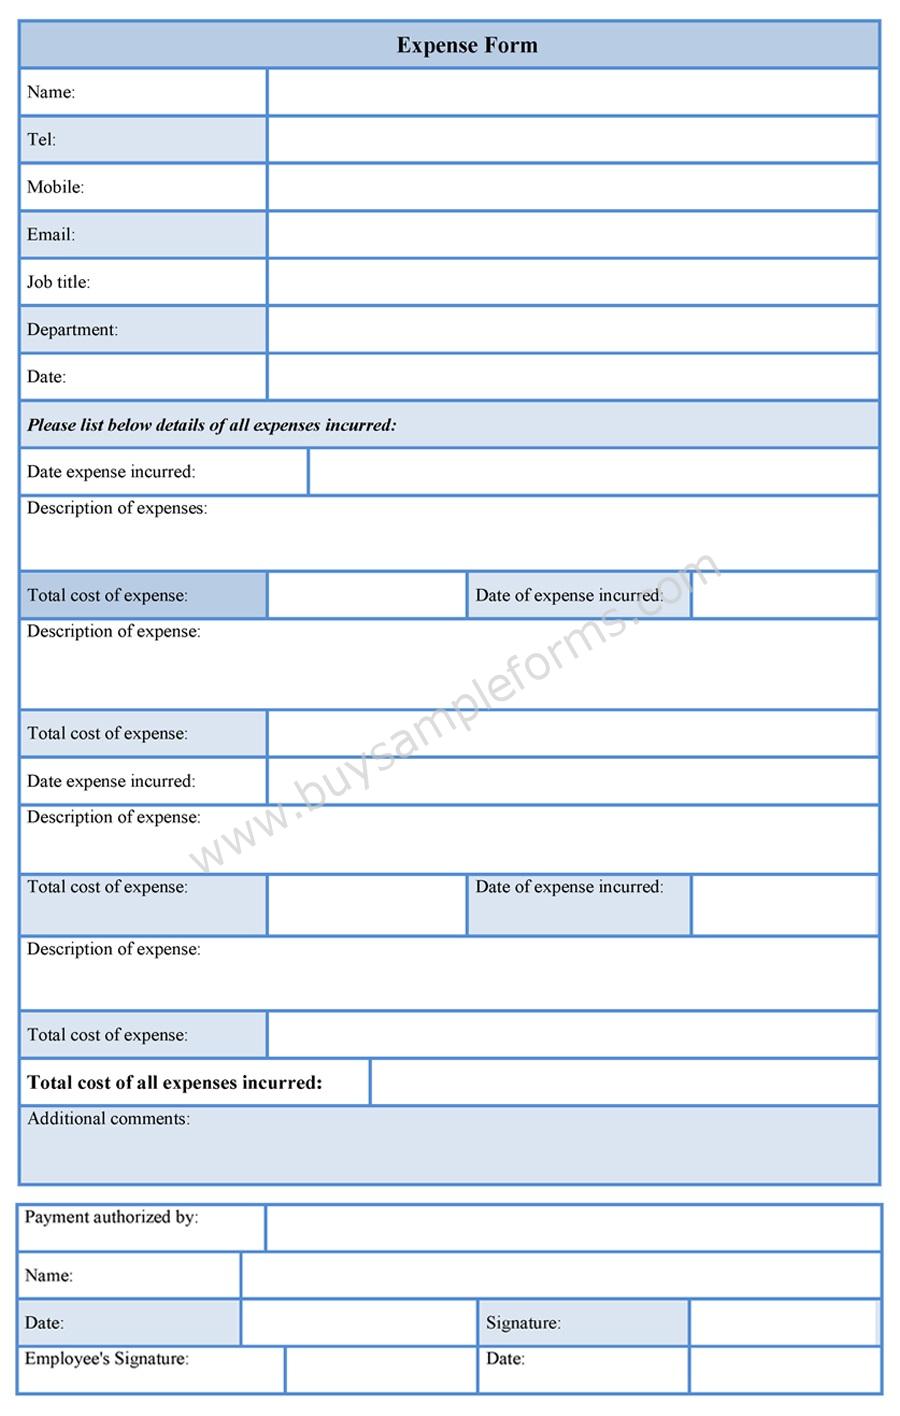 Expense Form Template - Sample Forms